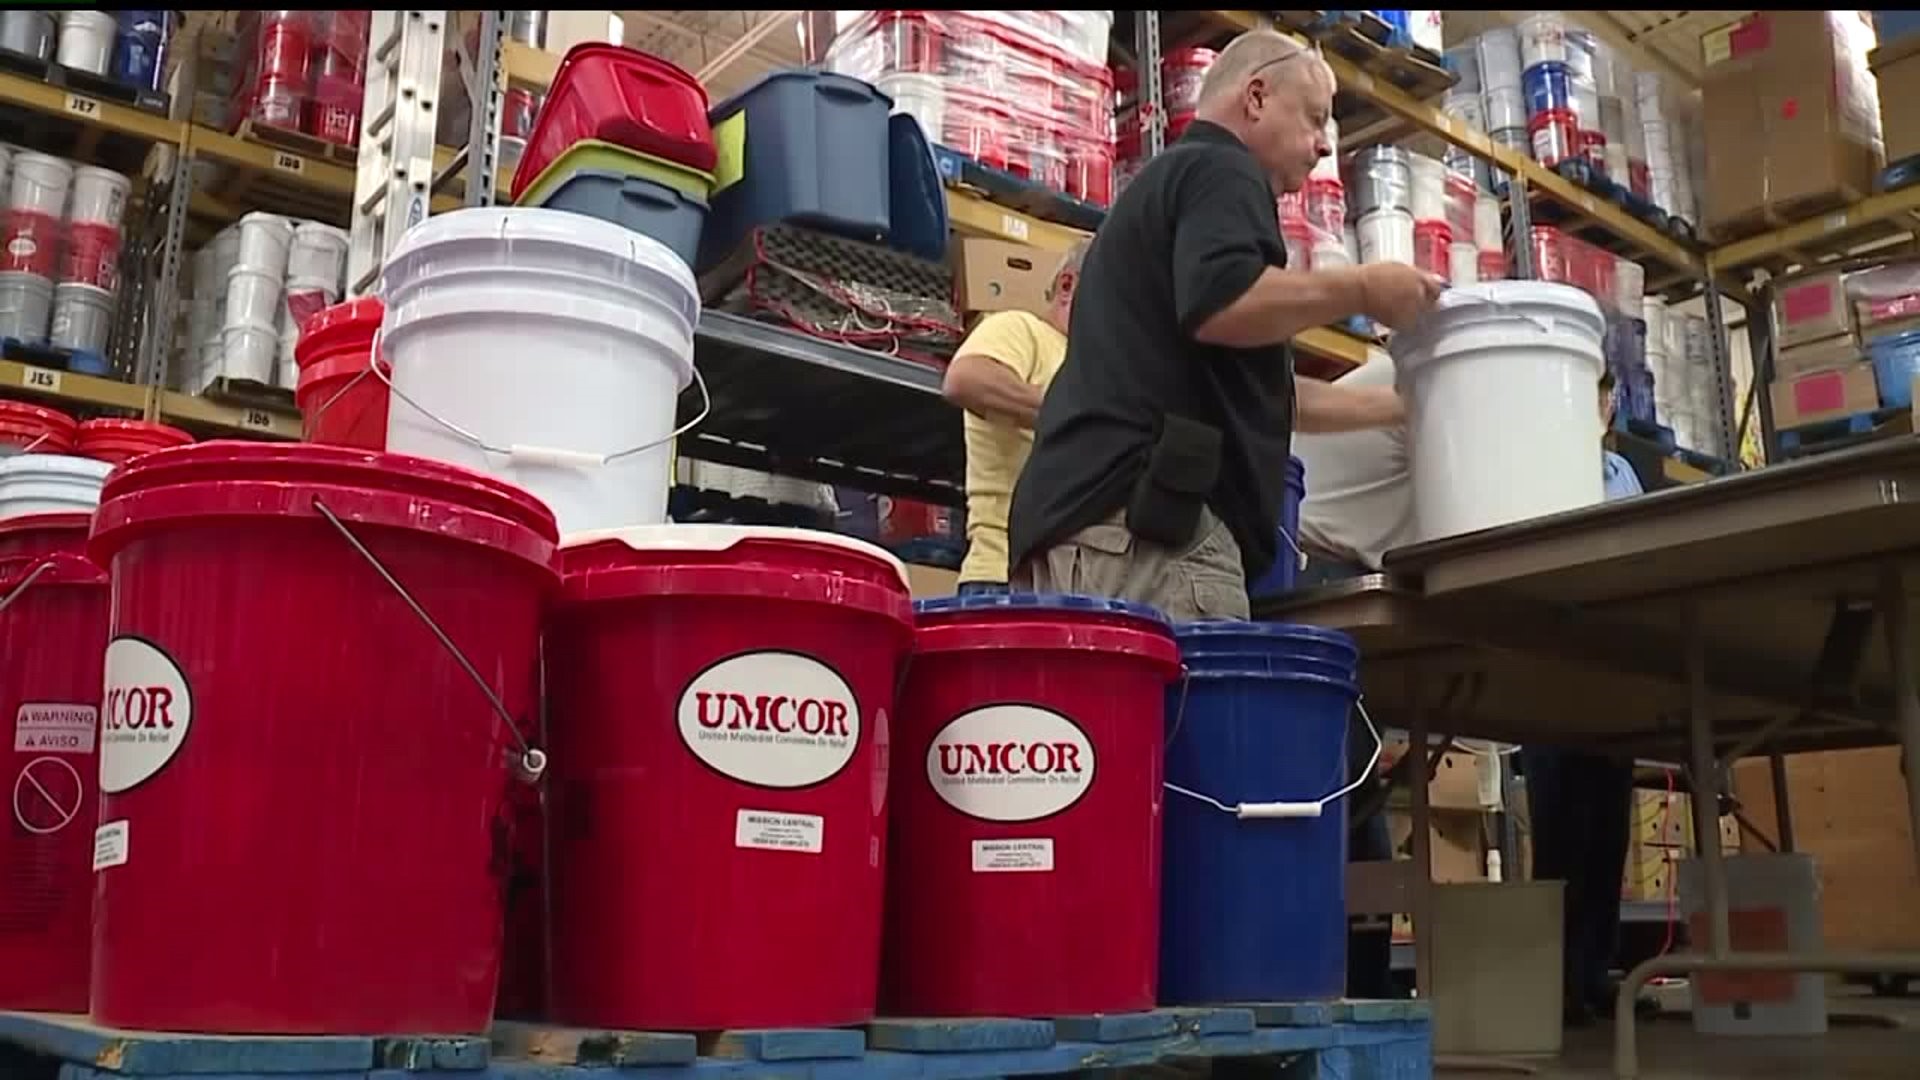 Pennsylvanians help victims of Harvey through rescue, relief and recovery